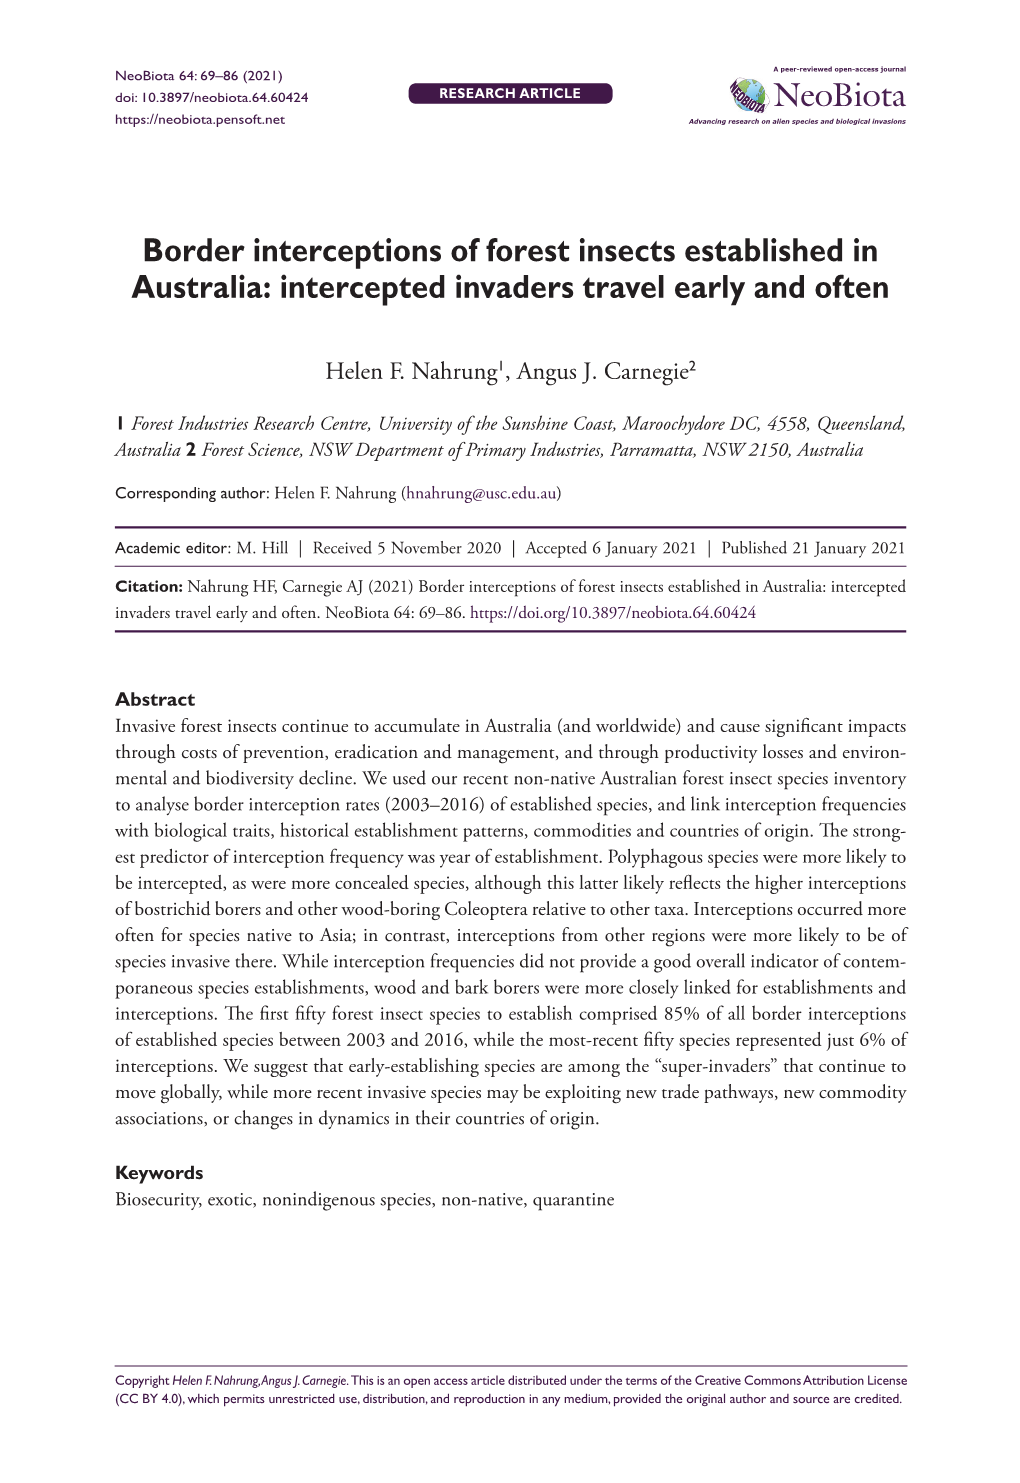 Border Interceptions of Forest Insects Established in Australia: Intercepted Invaders Travel Early and Often